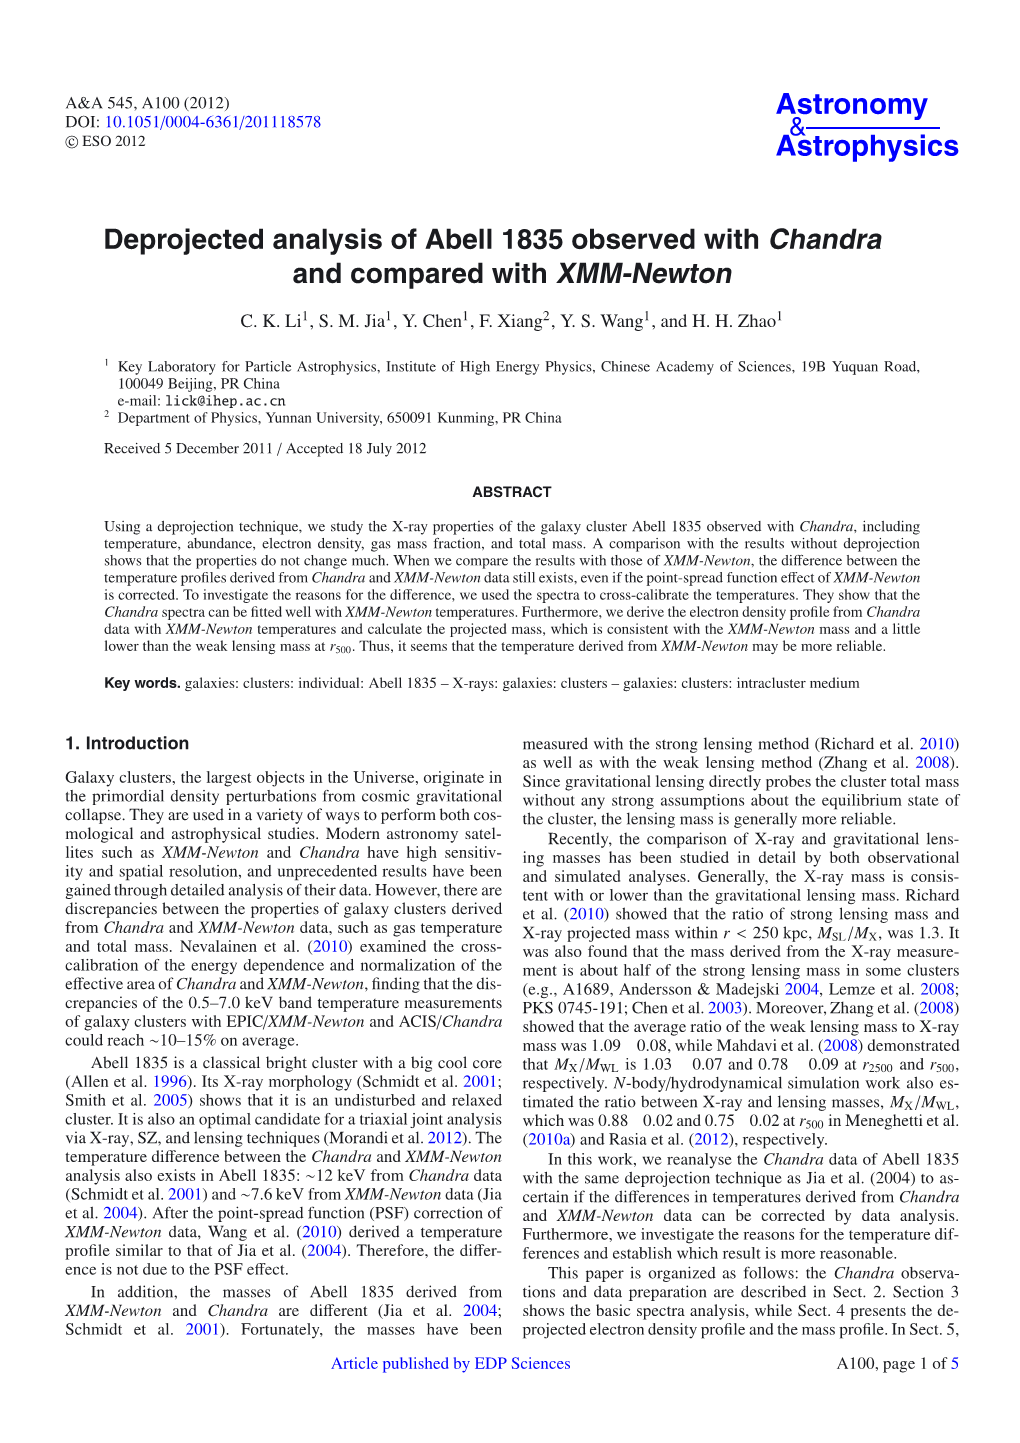 Deprojected Analysis of Abell 1835 Observed with Chandra and Compared with XMM-Newton